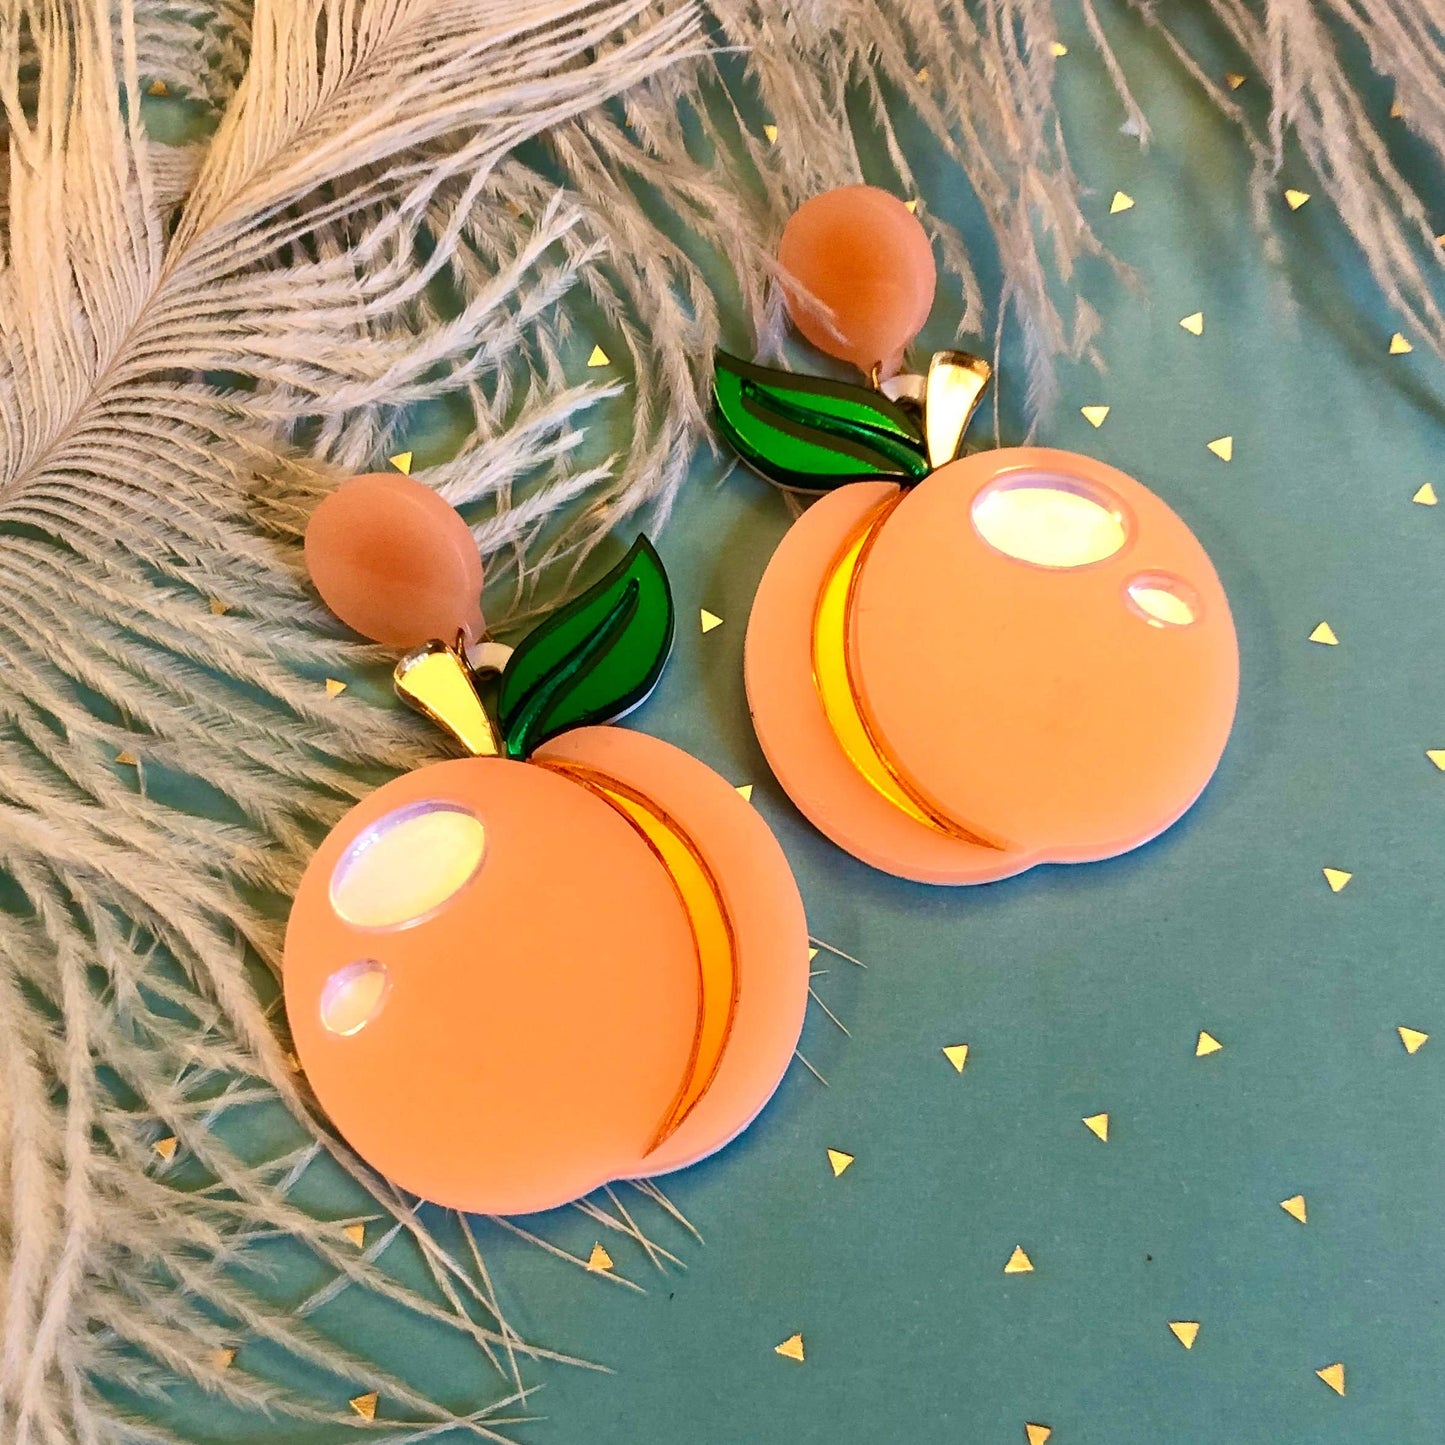 I'm Your Present - Peach Earrings, Fruit Summer Laser Cut Acrylic, Plastic Jewelry